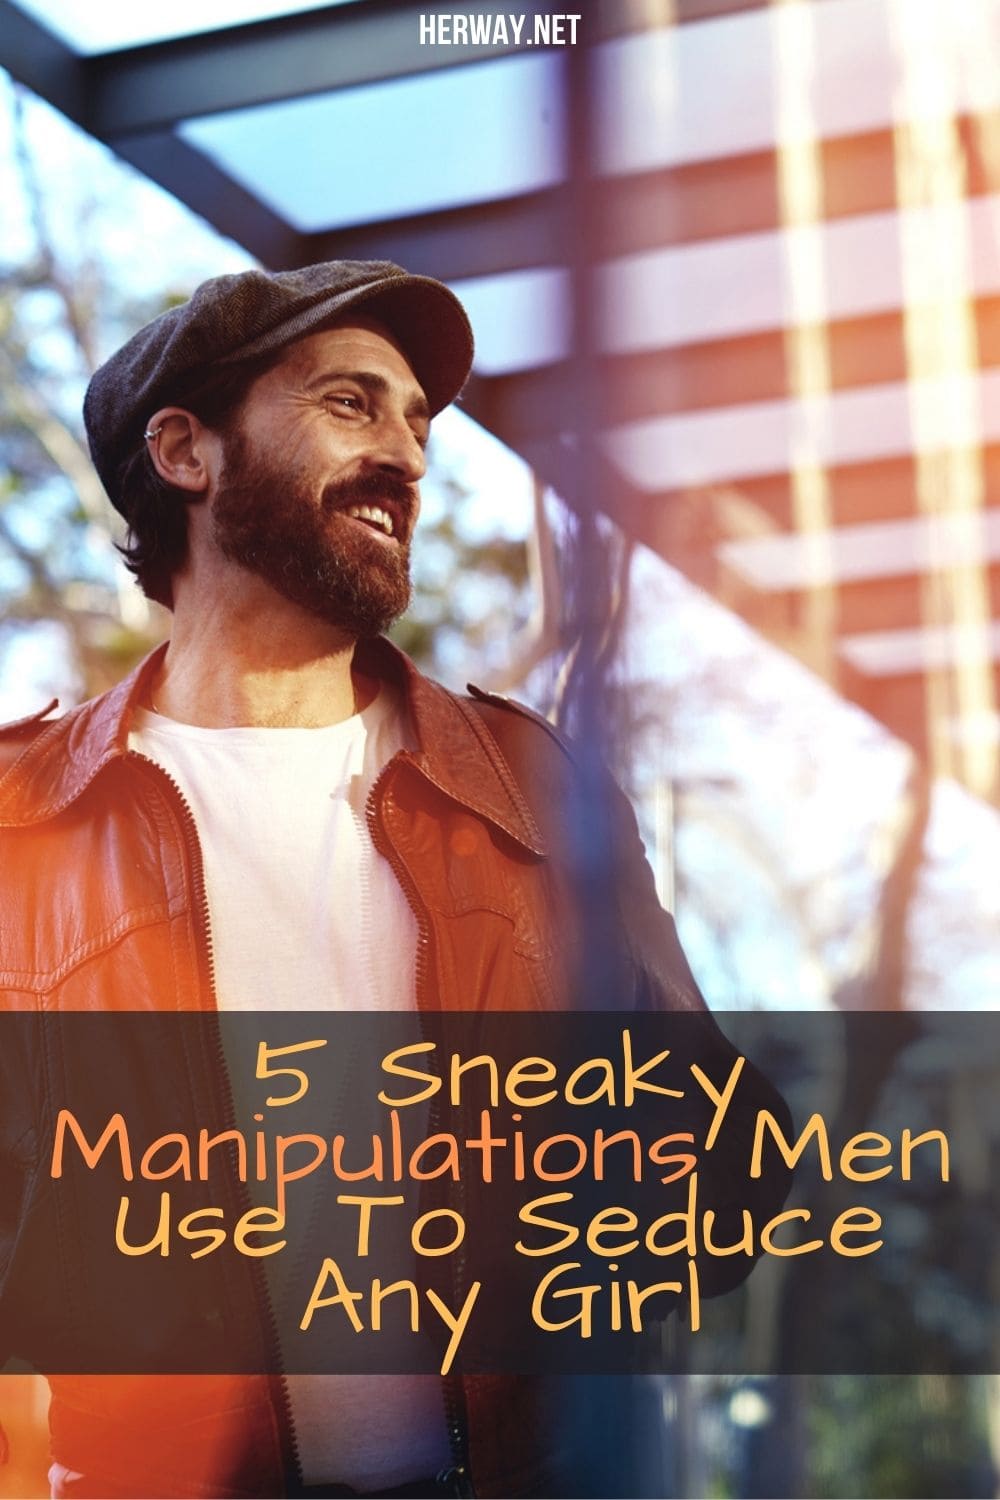 5 Sneaky Manipulations Men Use To Seduce Any Girl